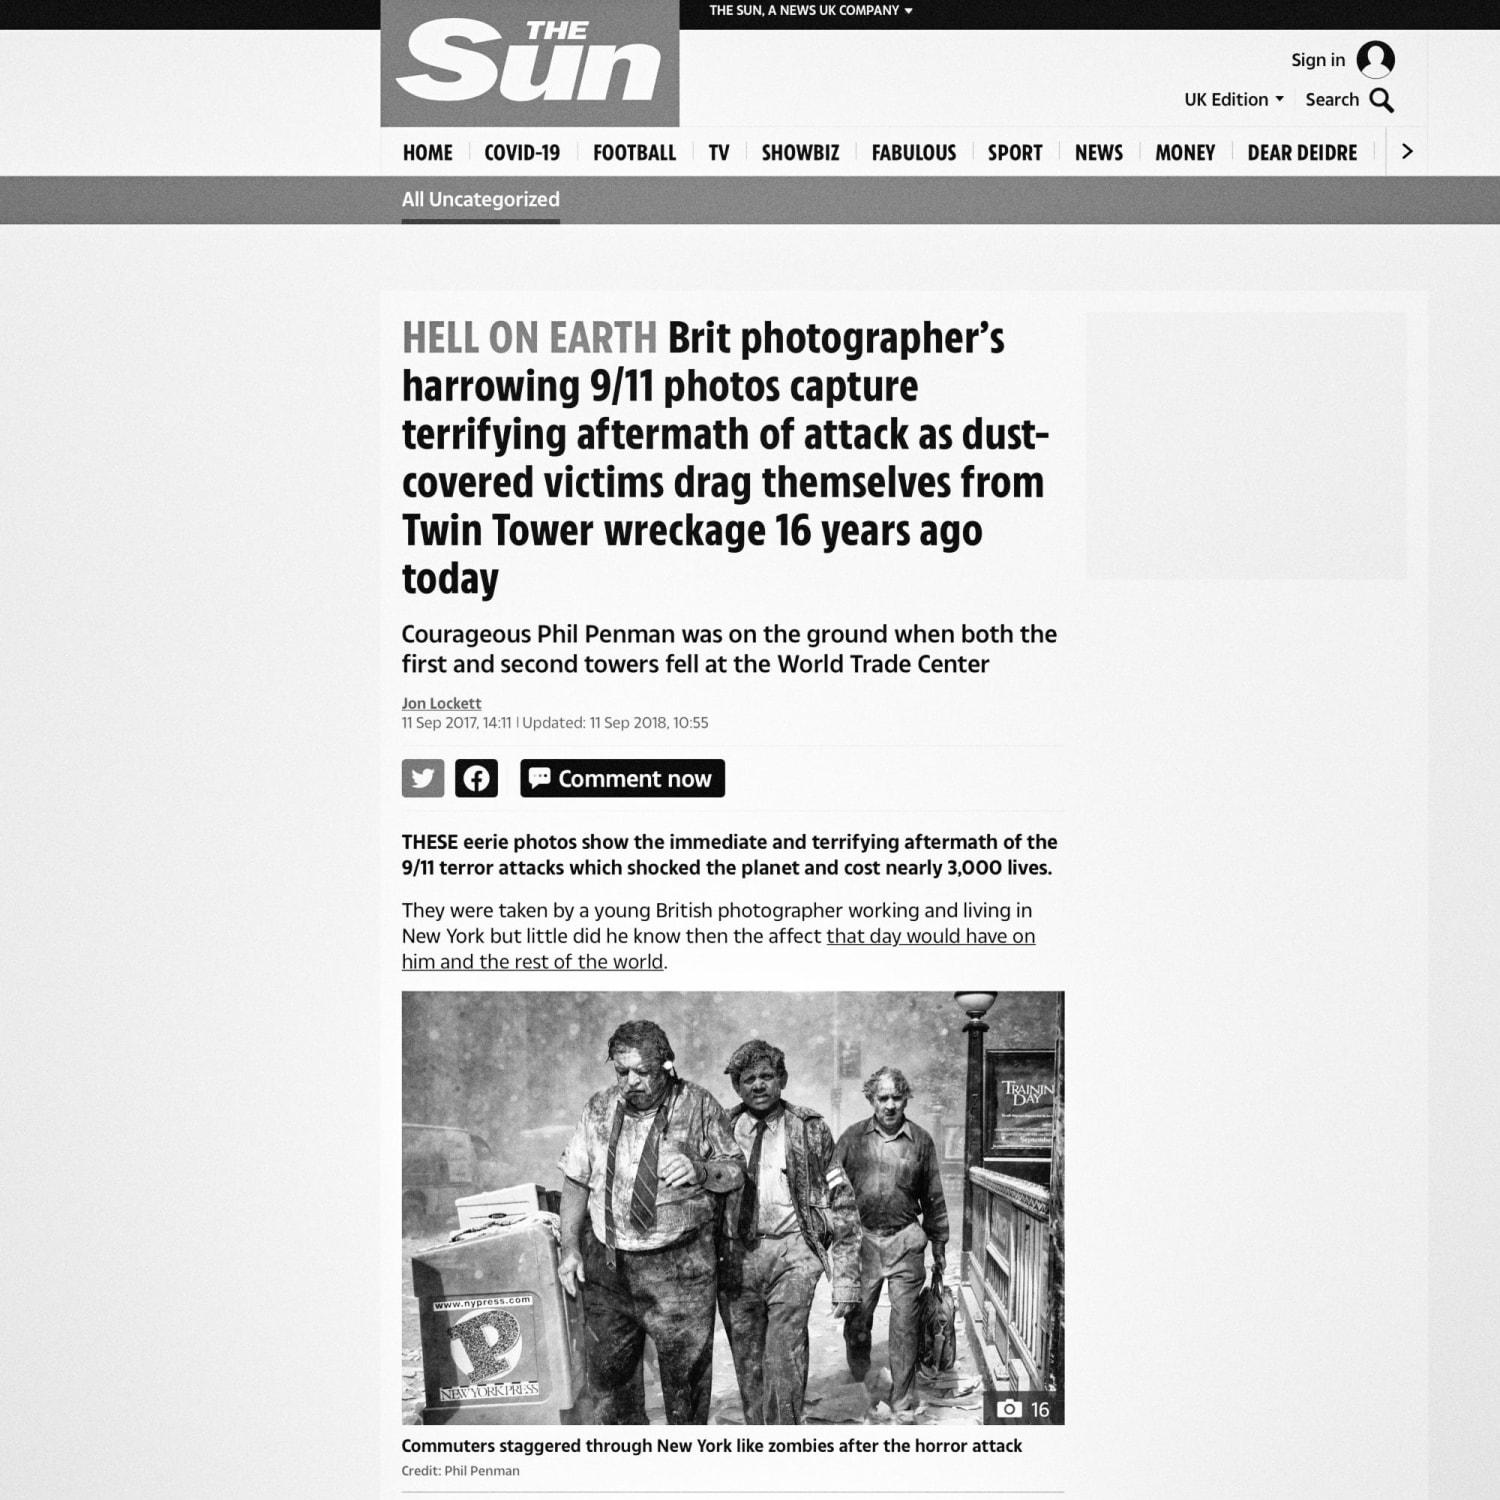 THE SUN: BRITS HARROWING 9/11 PICTURES